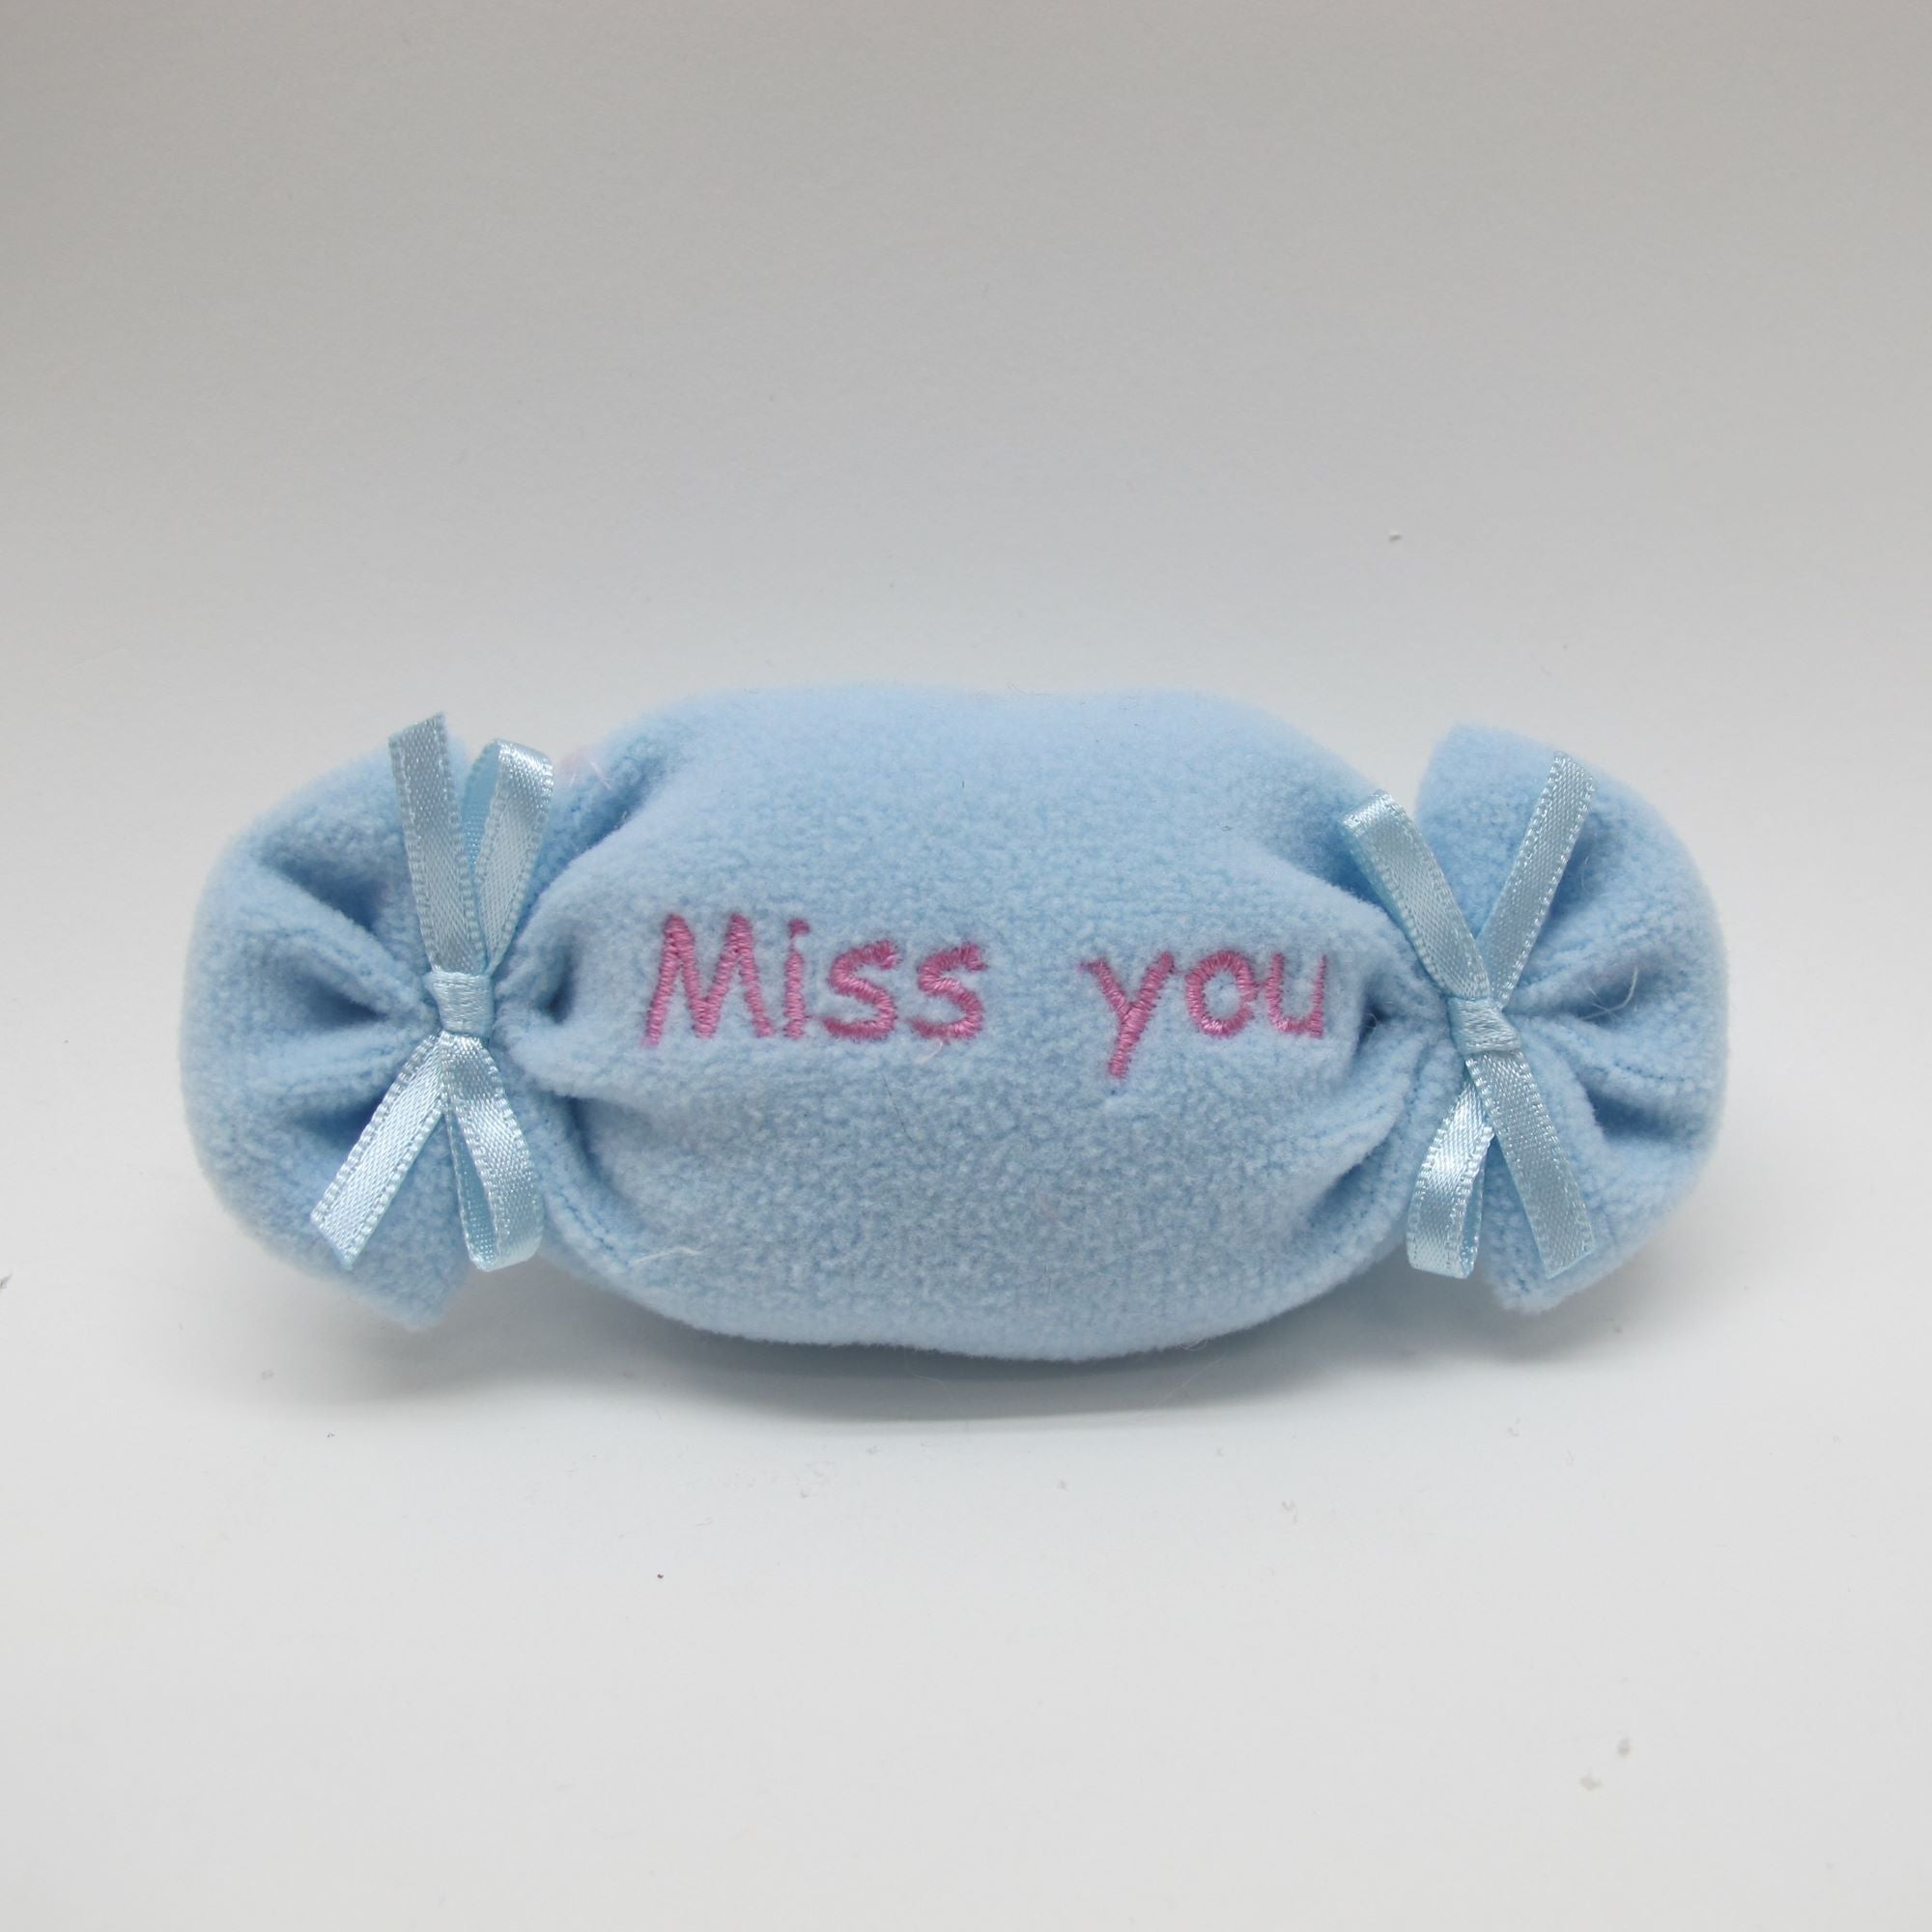 CANDY WITH EMBROIDER "MISS YOU"